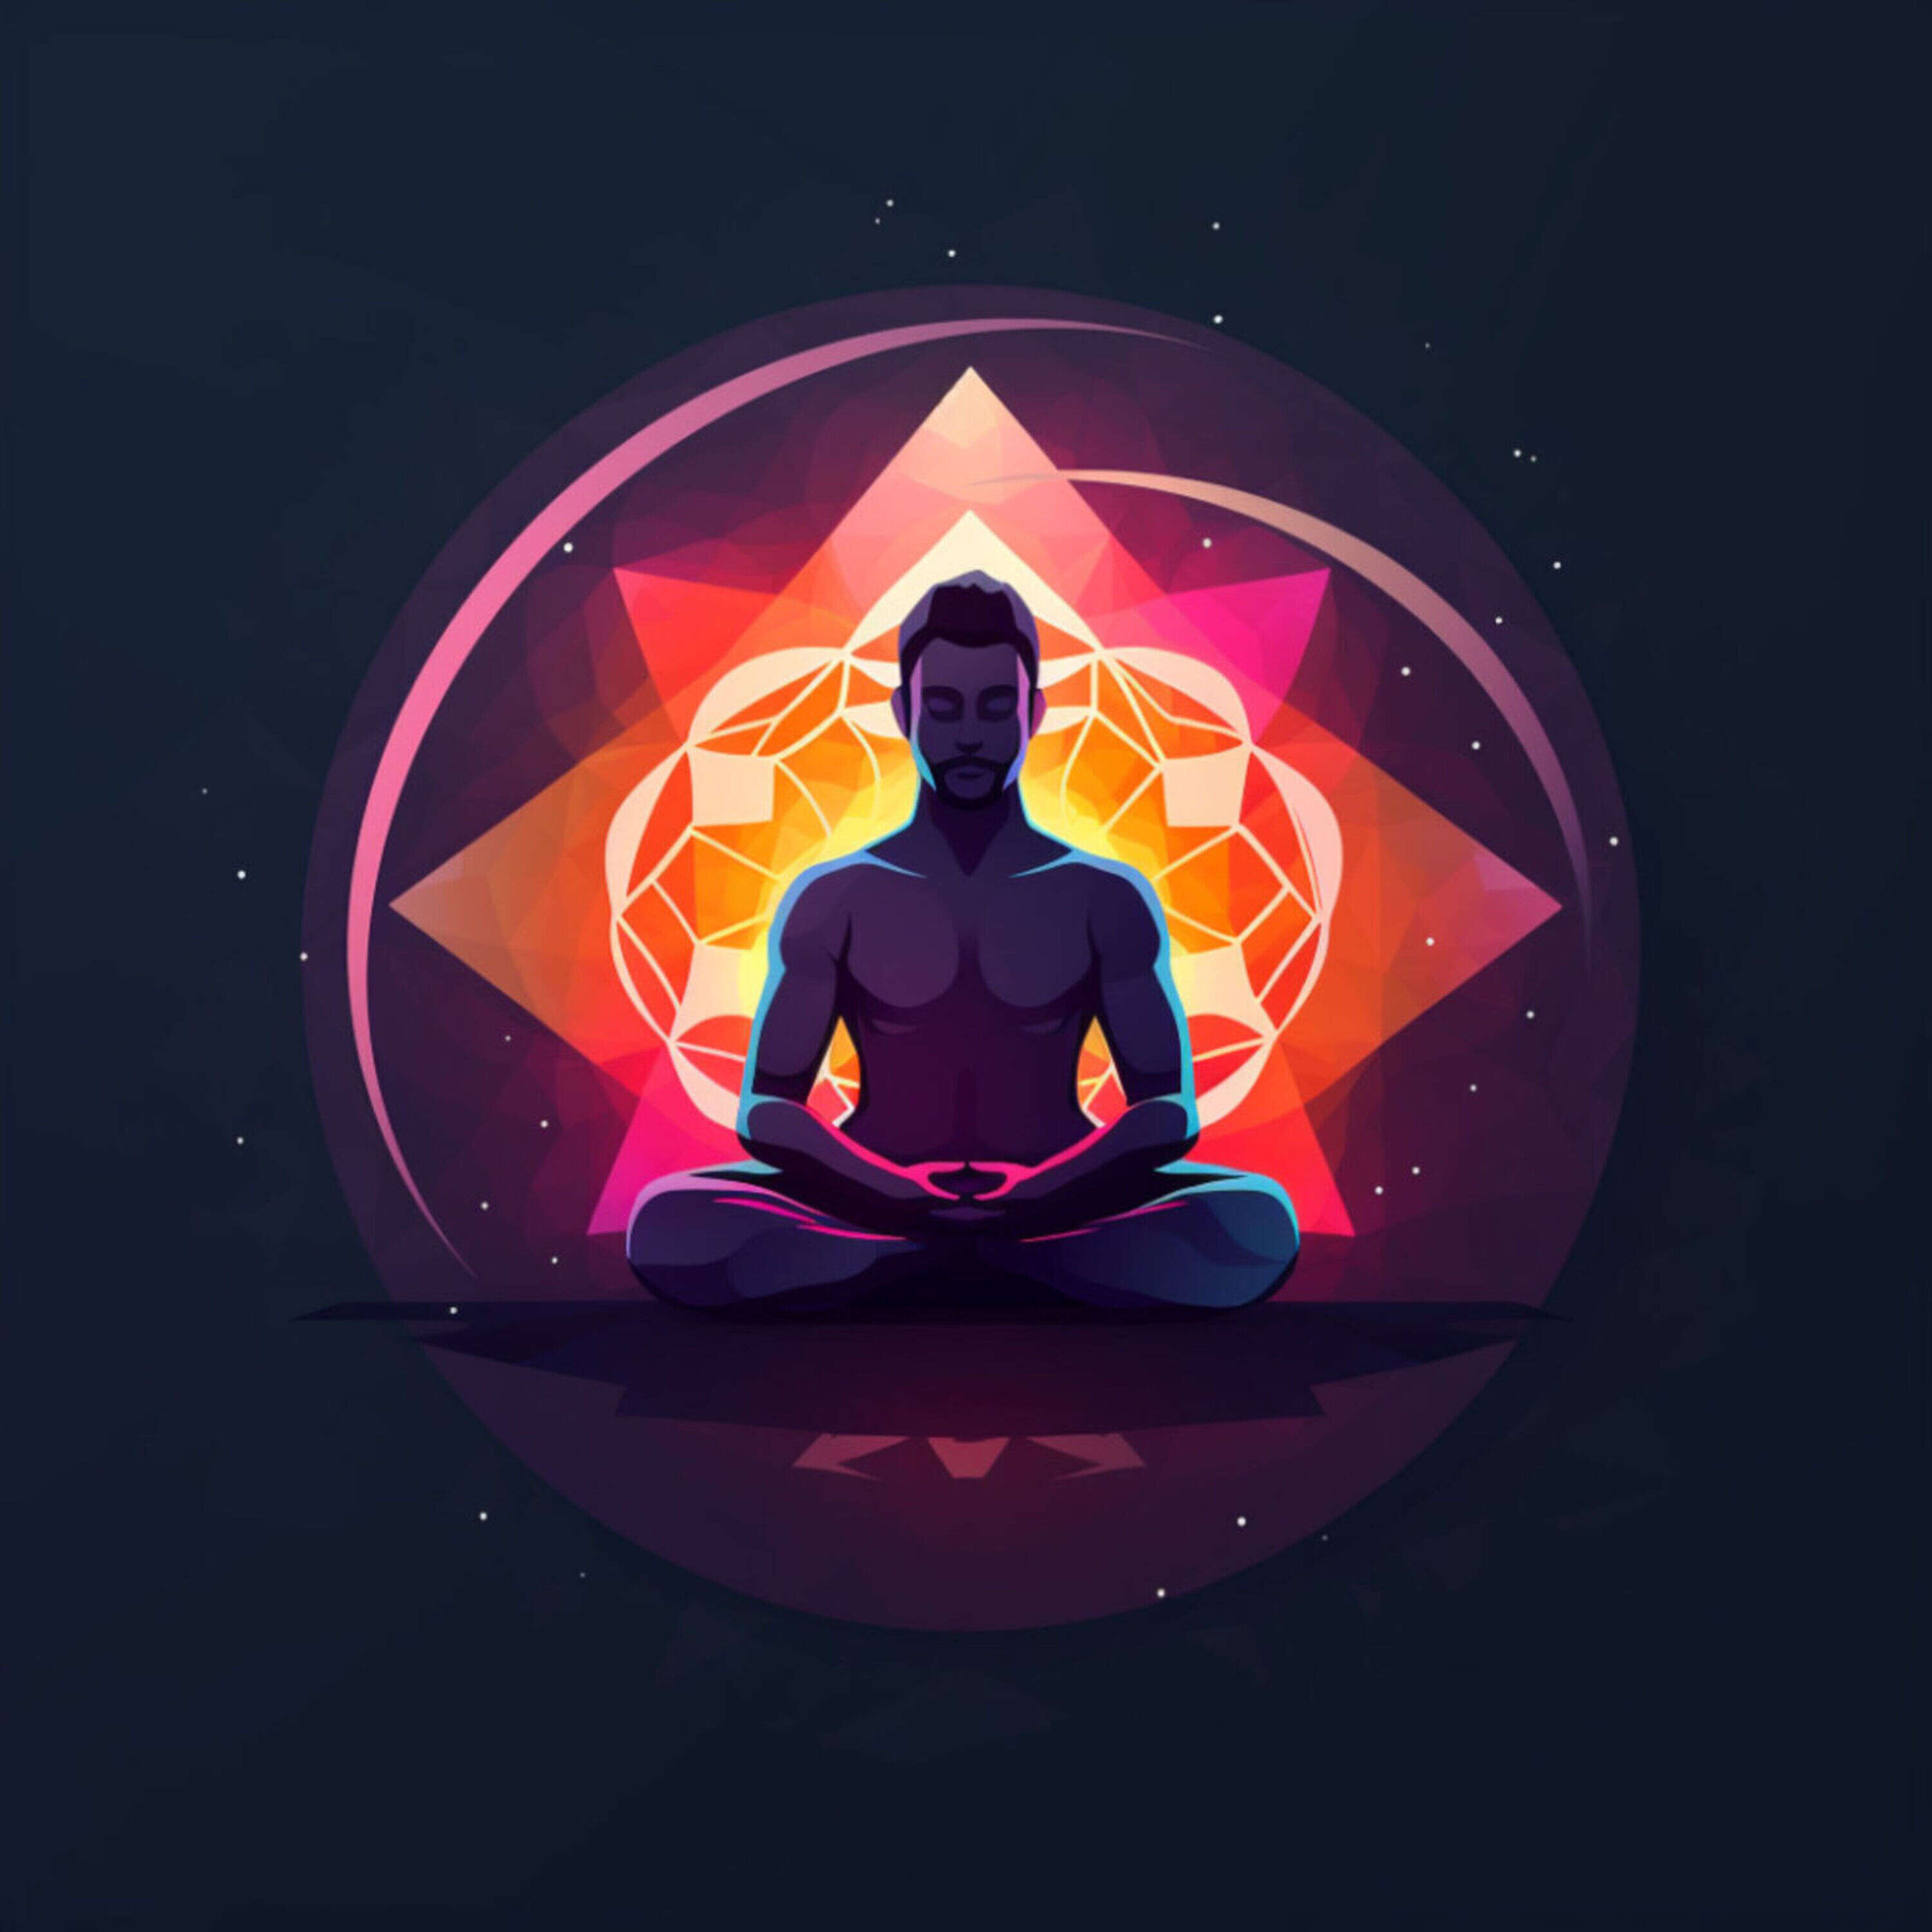 Meditation Sounds for Mindfulness and Relaxation